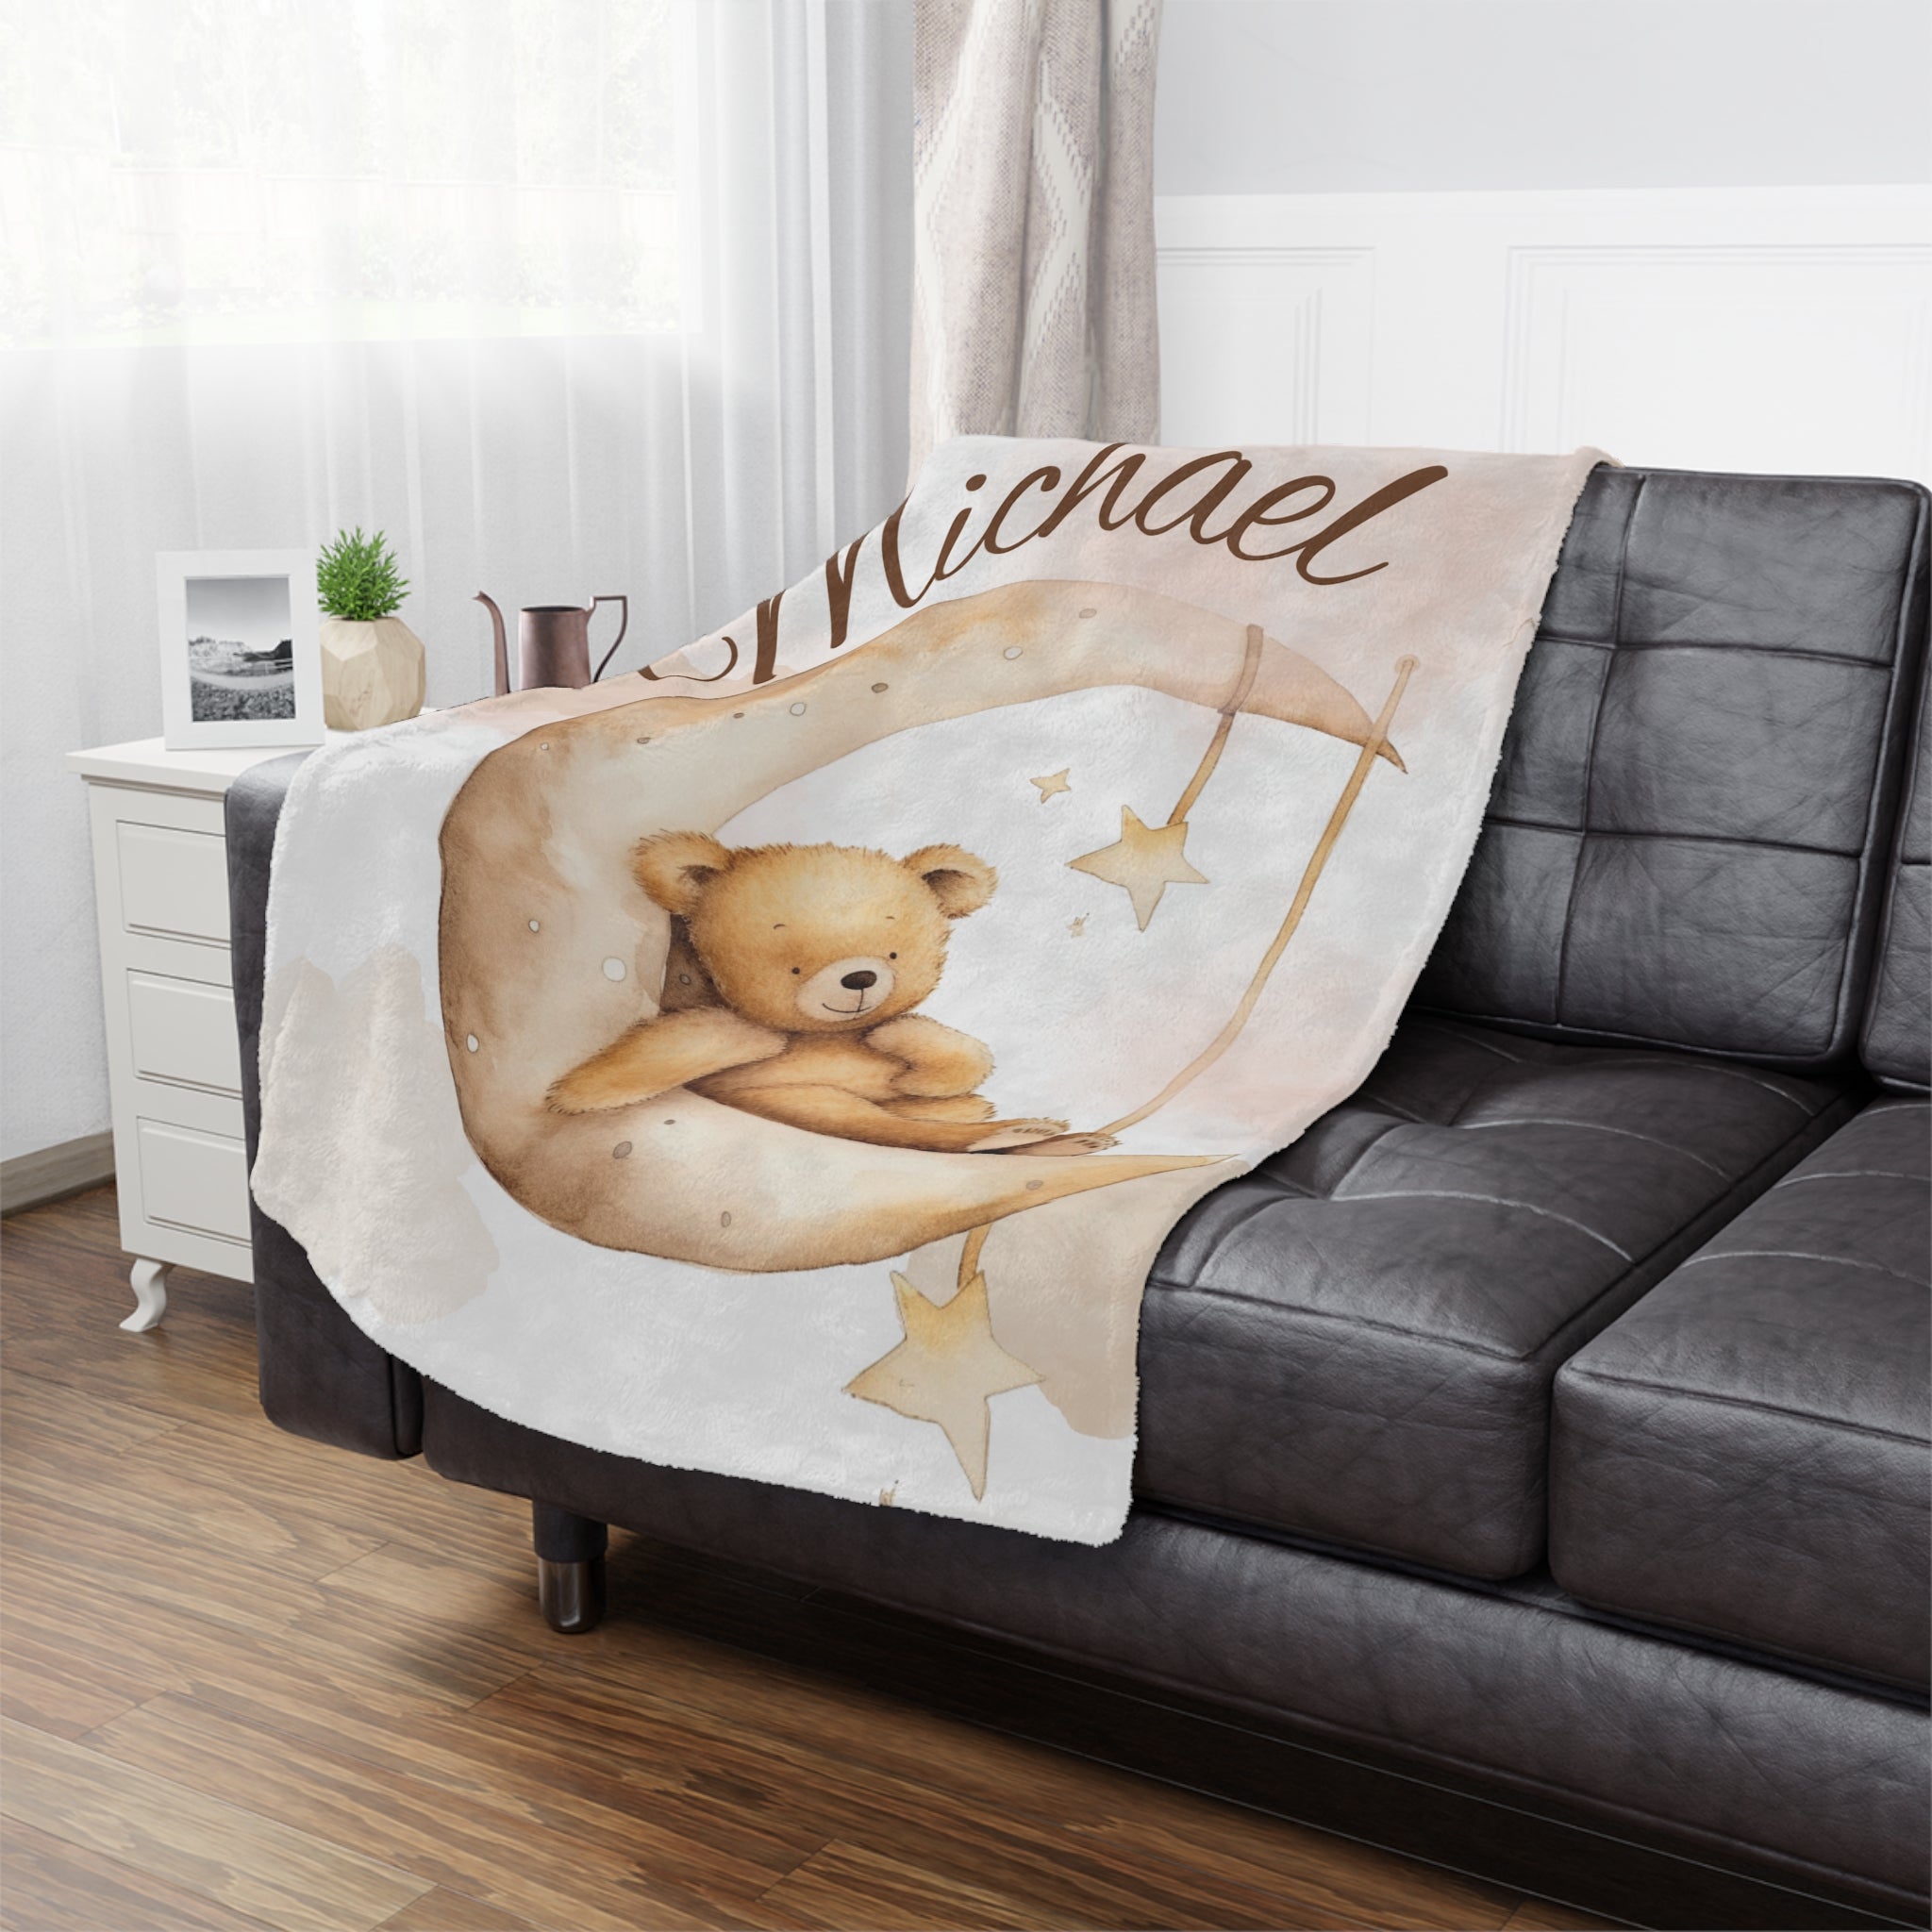 personalized blanket for baby